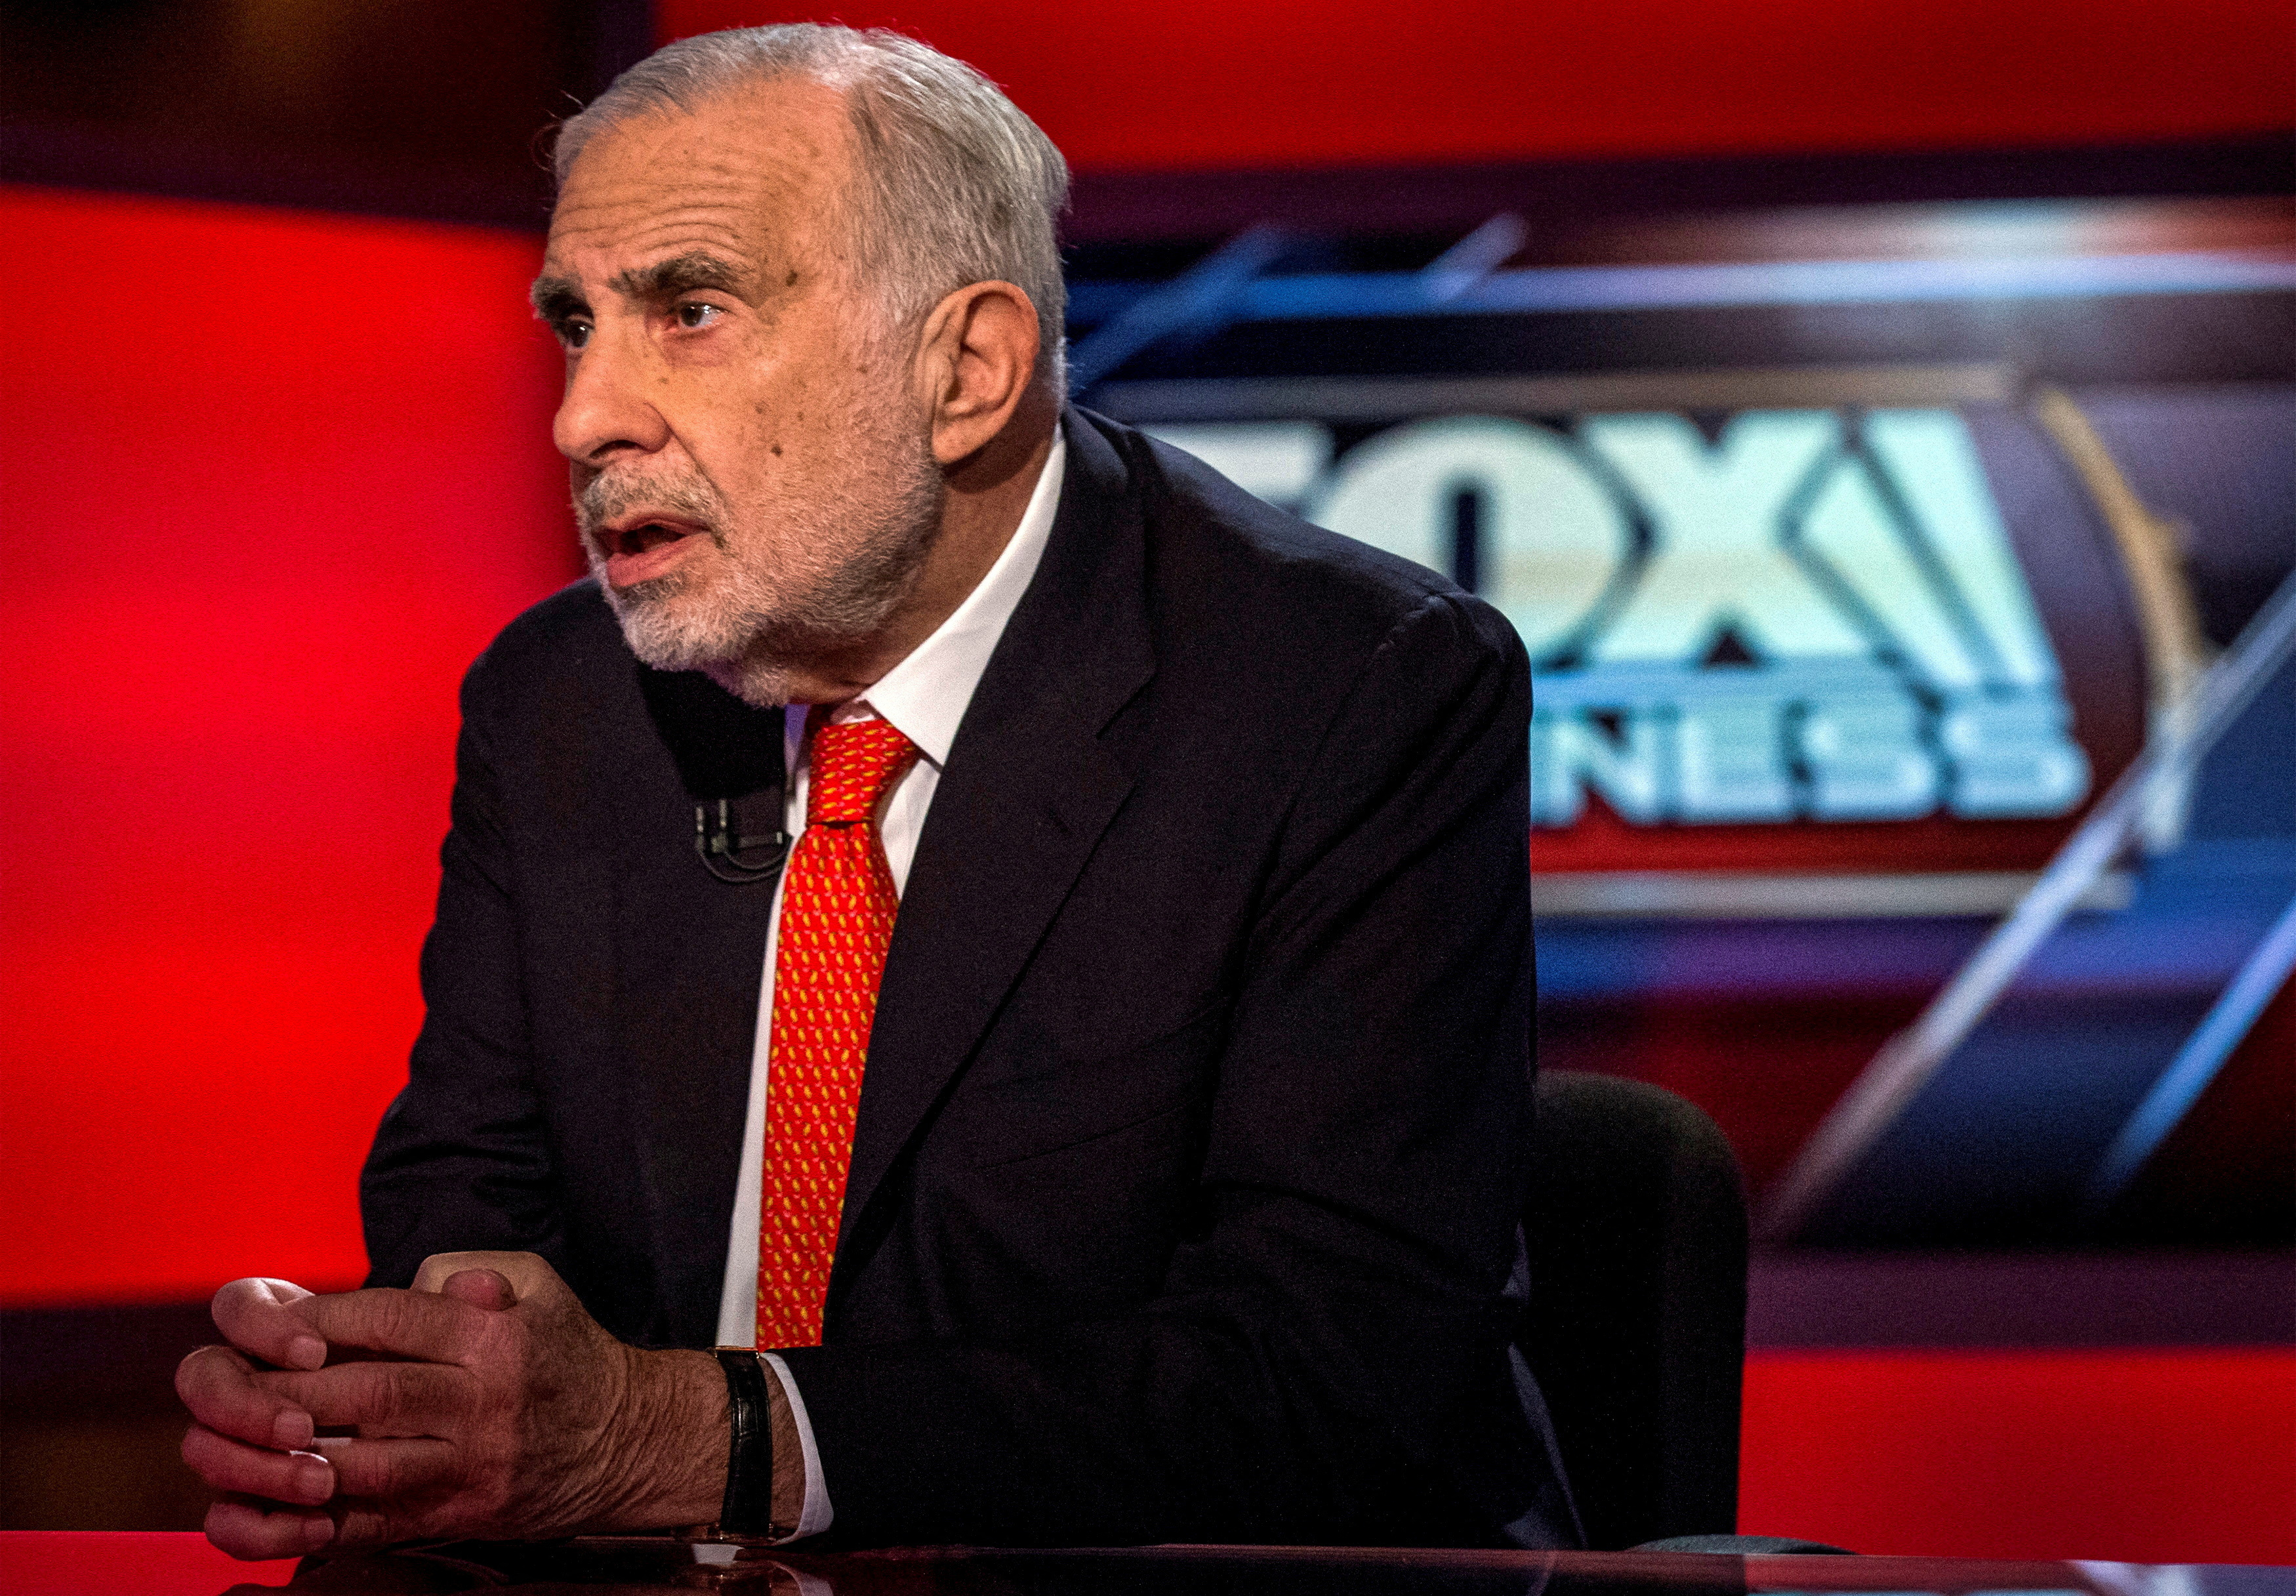 Carl Icahn gives an interview on FOX Business Network's Neil Cavuto show in New York